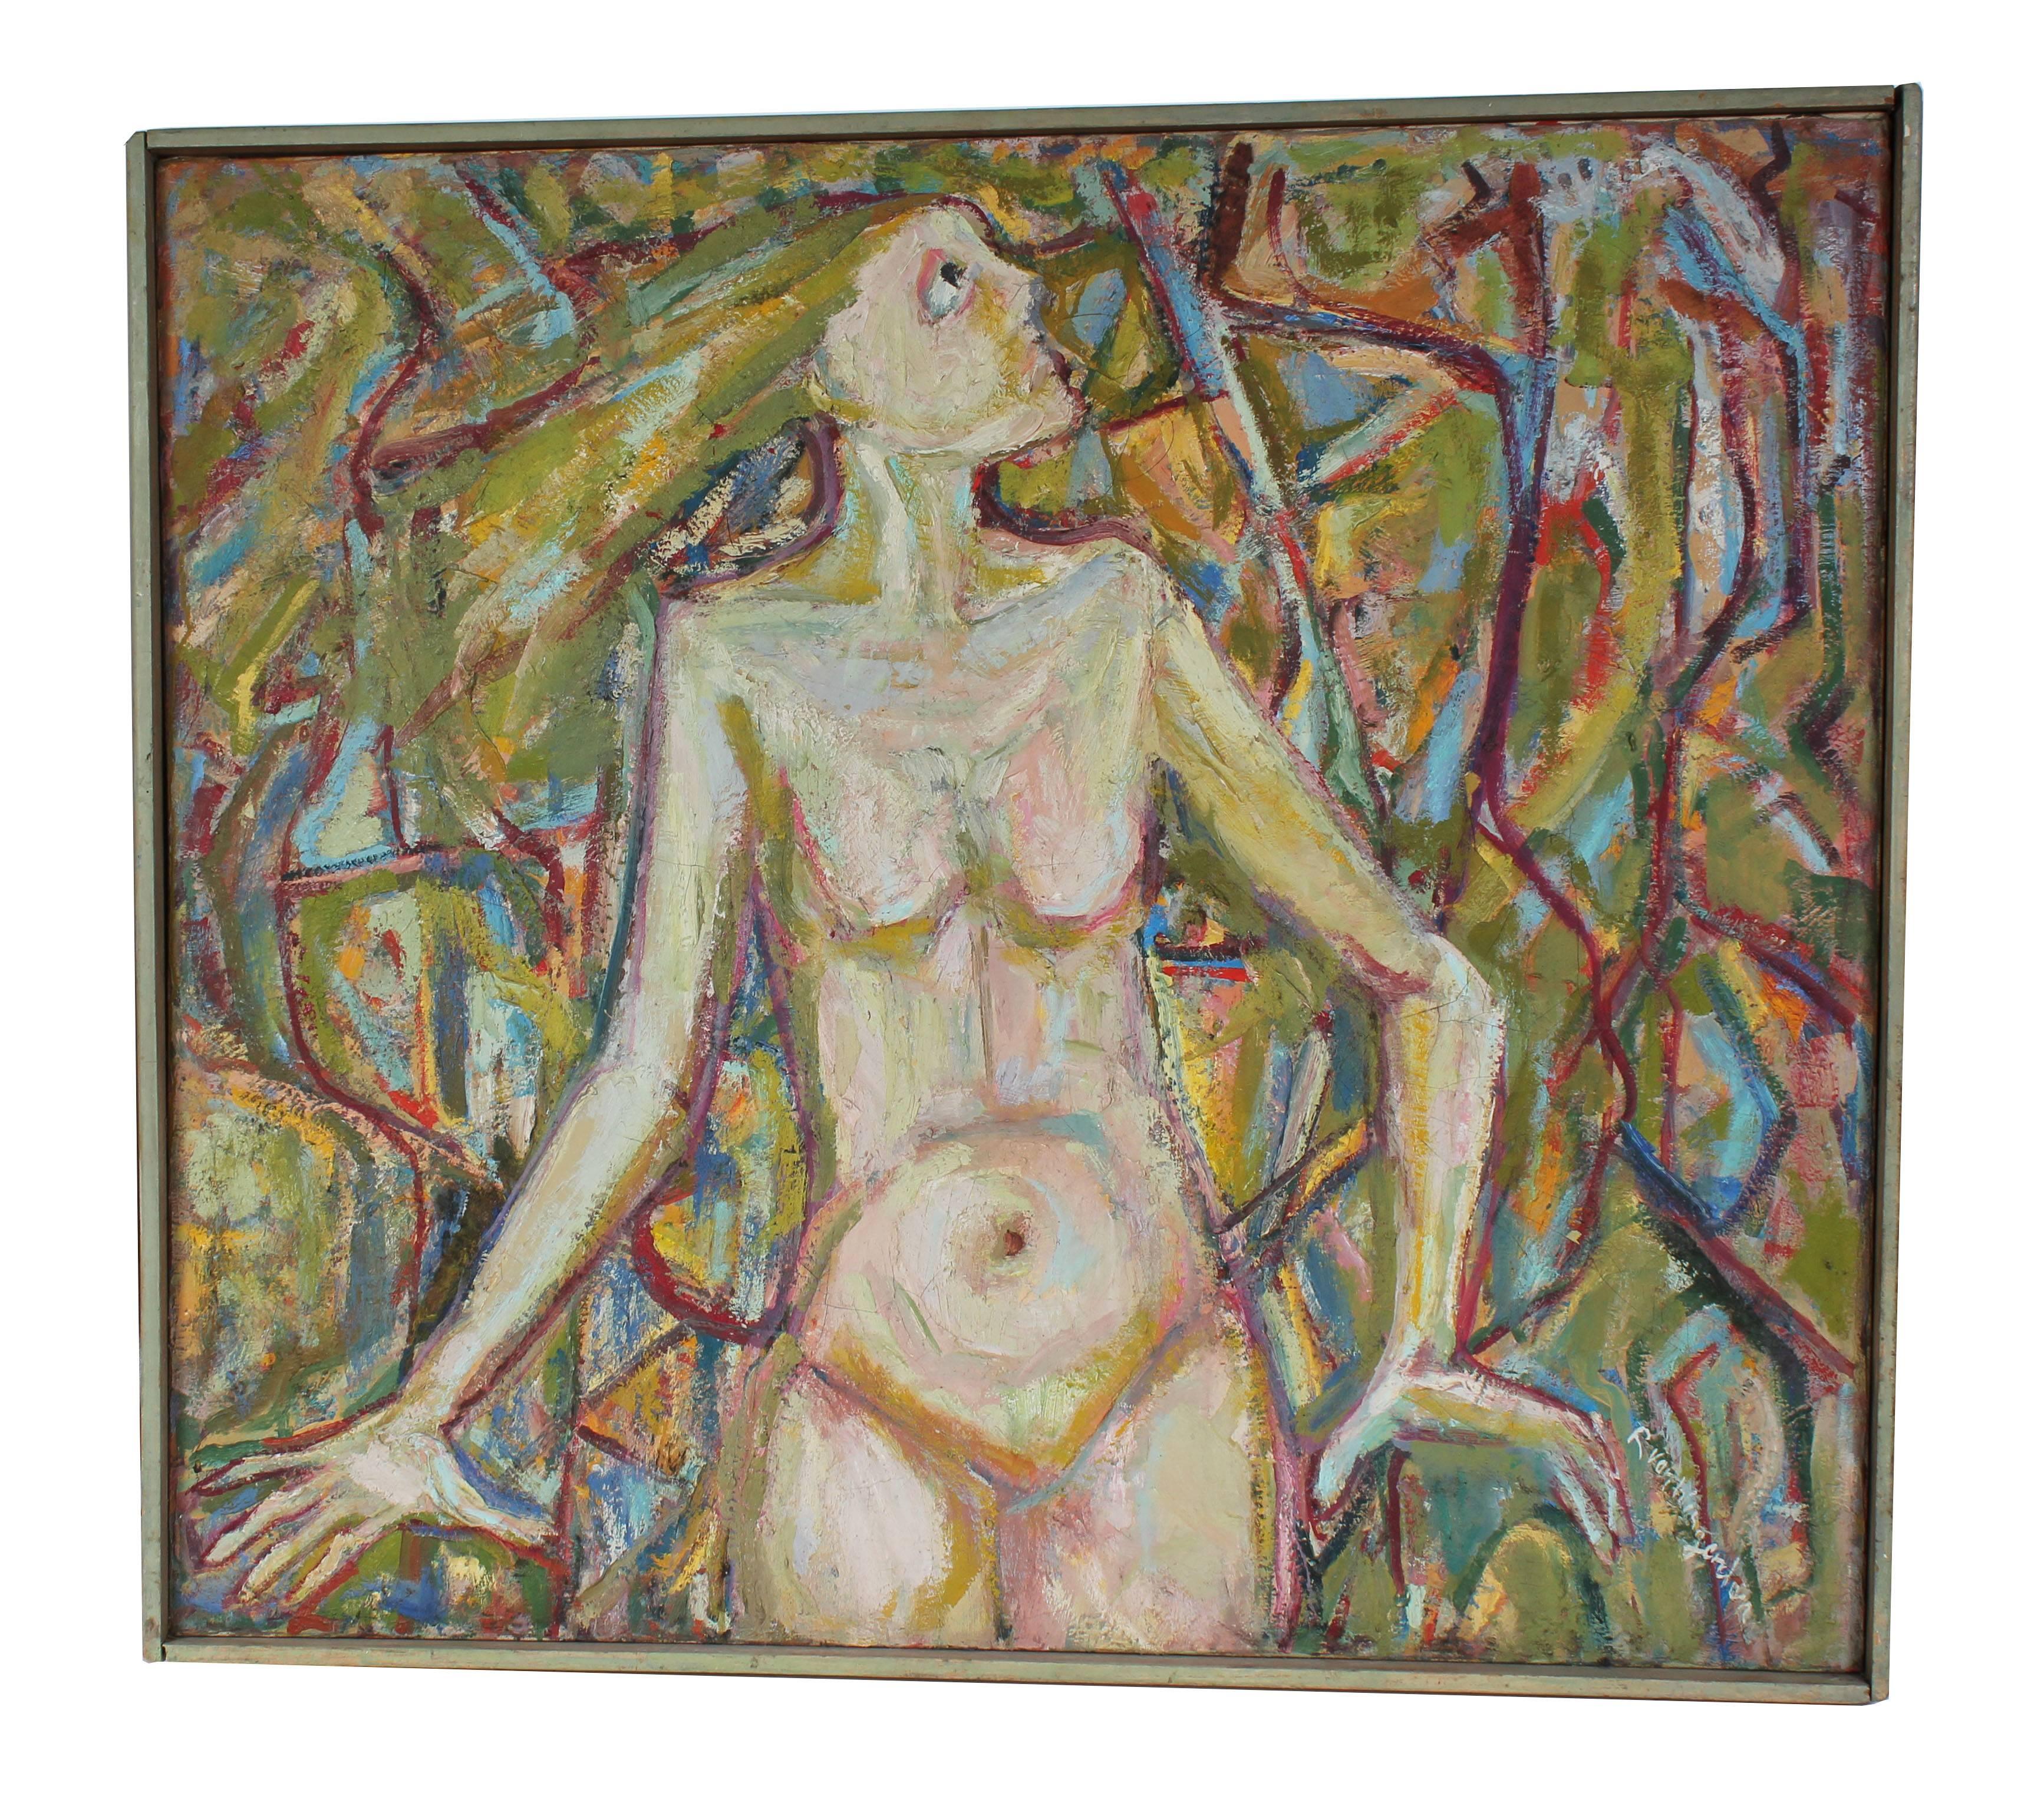 Richard Van Wingerden Nude Painting - Expressionist Nude with Green, Oil on Canvas, Circa 1950